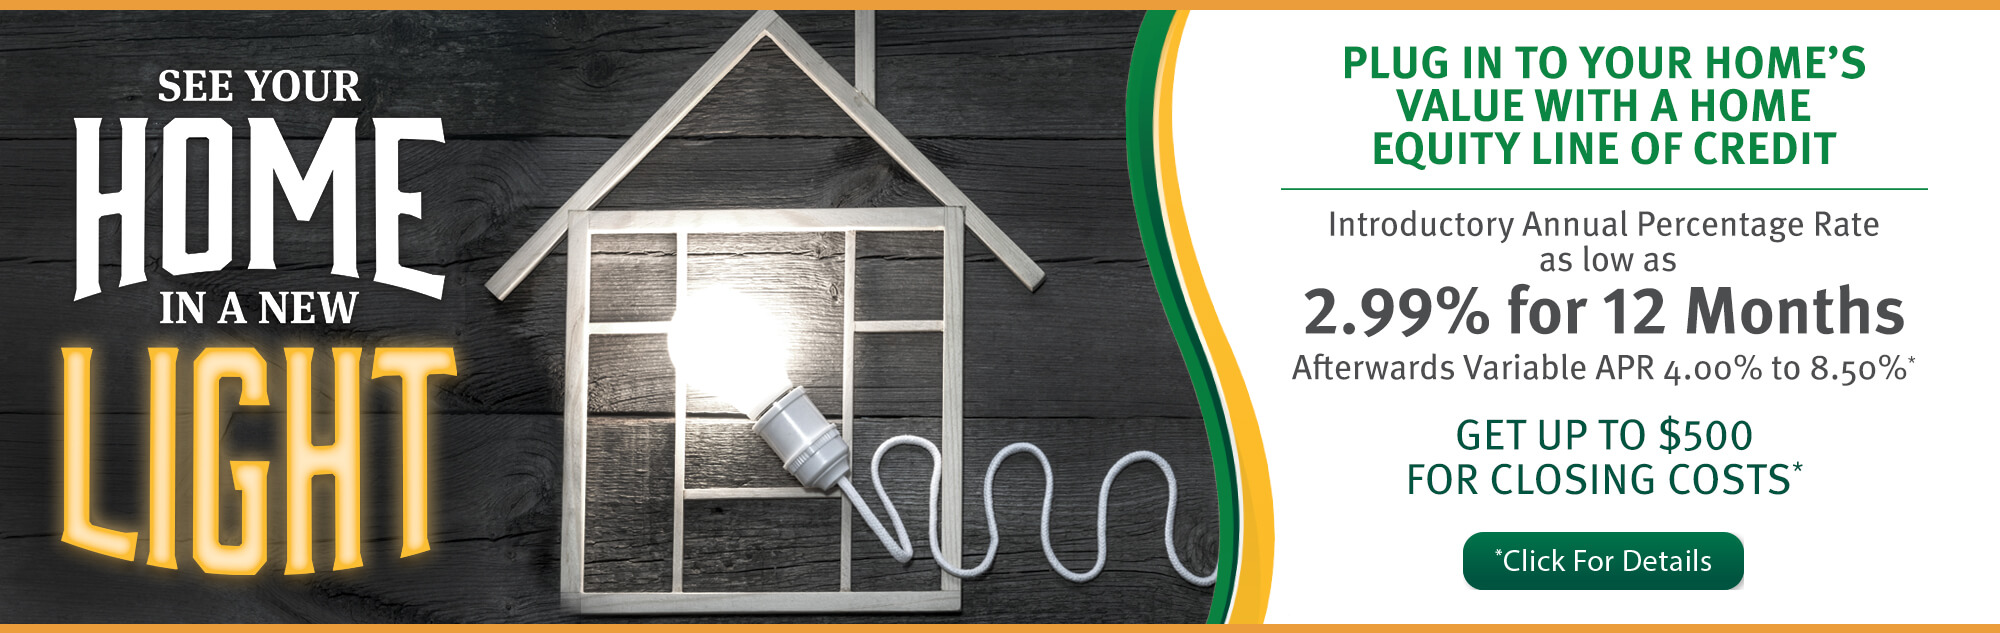 See Your Home in a new light - Plug in to your home's value with a home equity line of credit